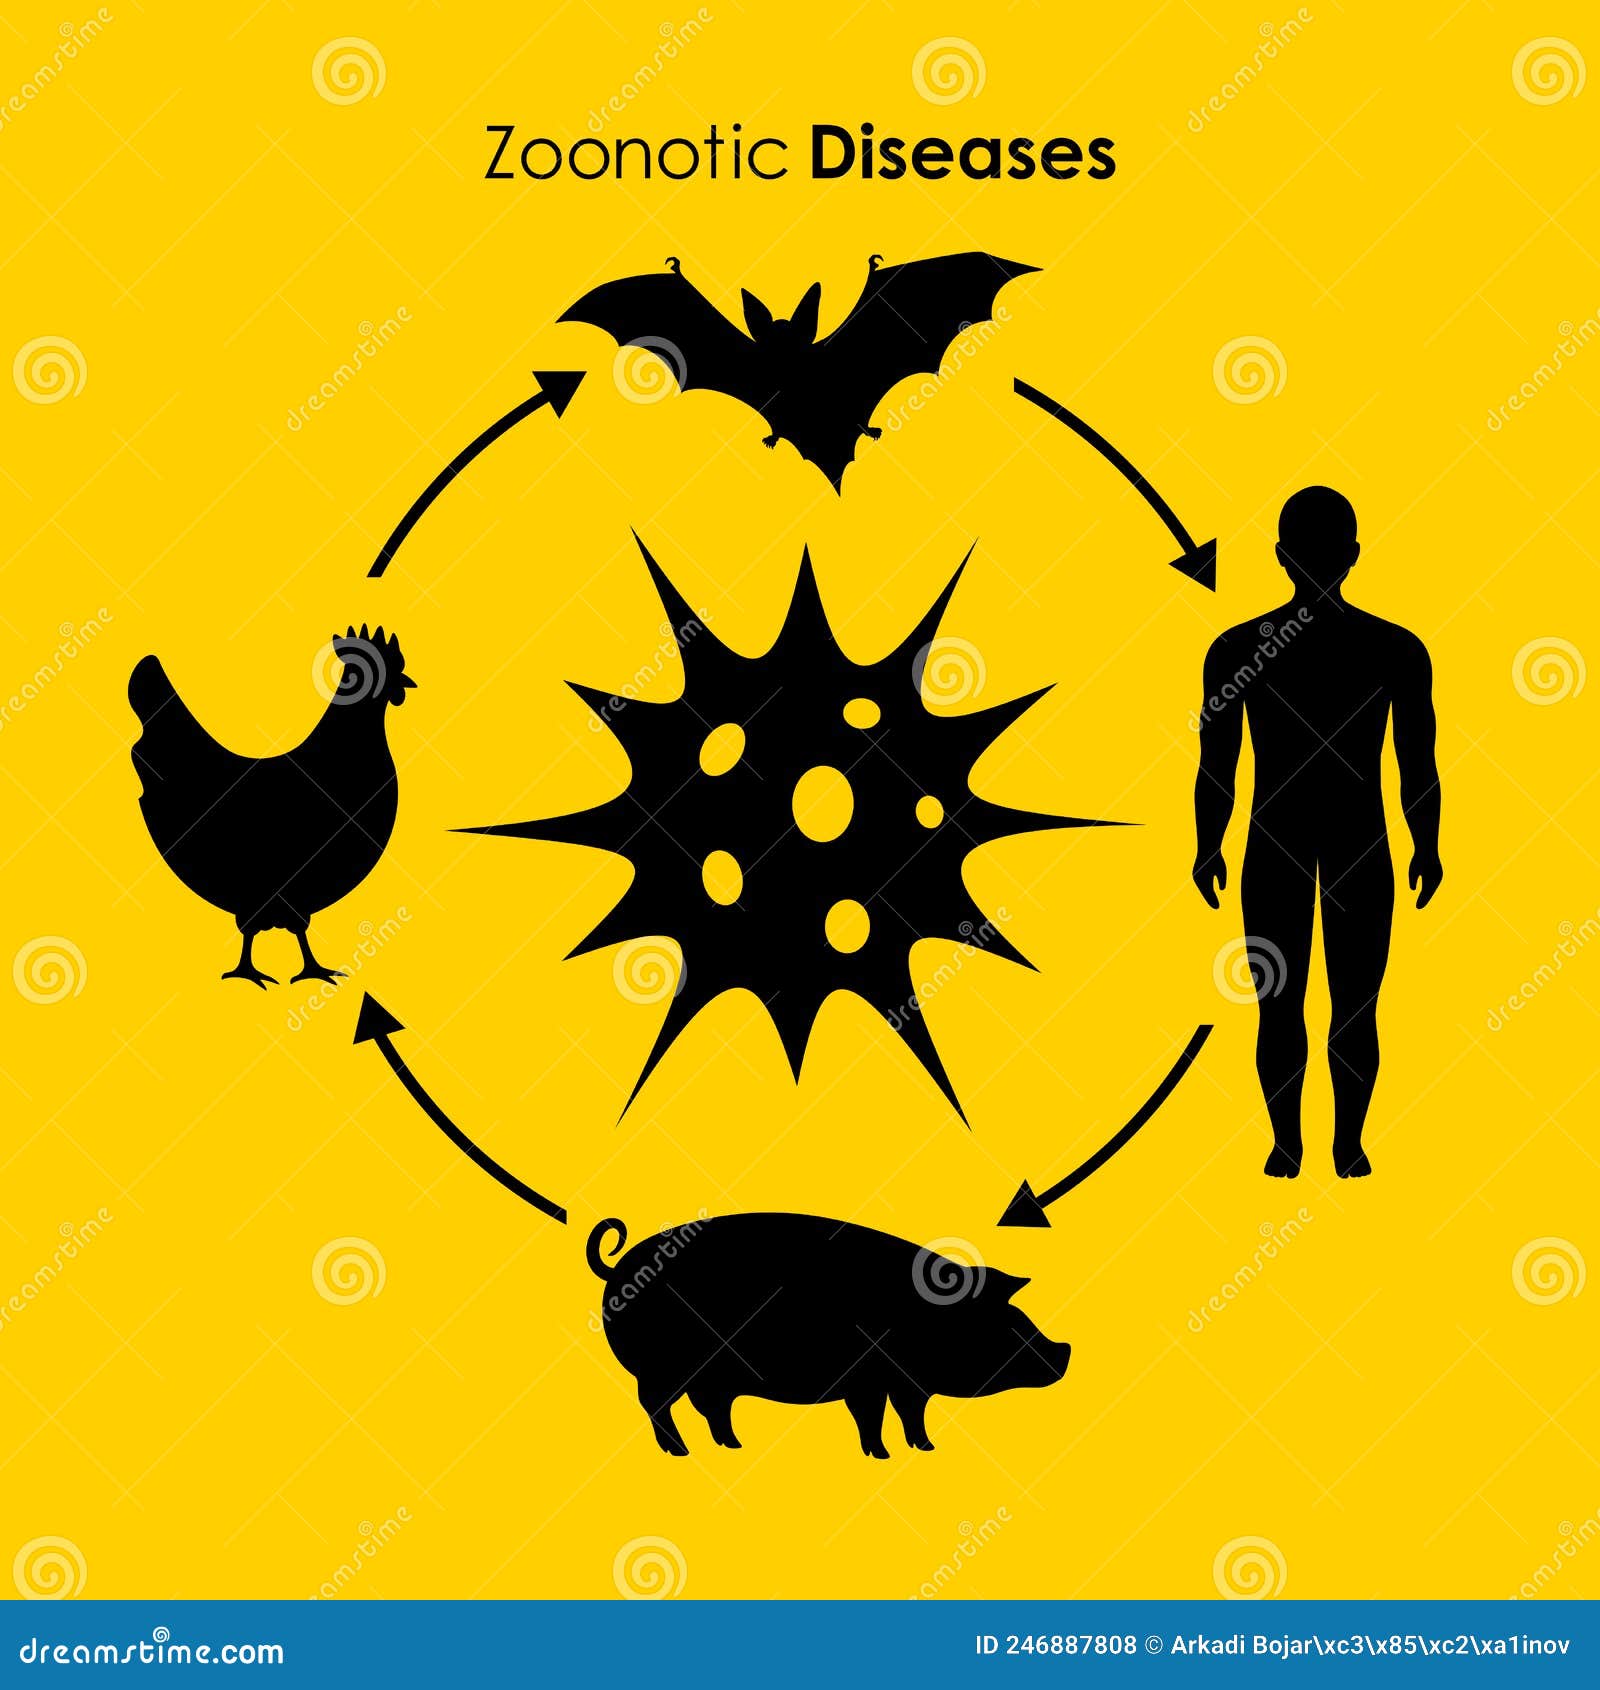 zoonotic diseases  poster